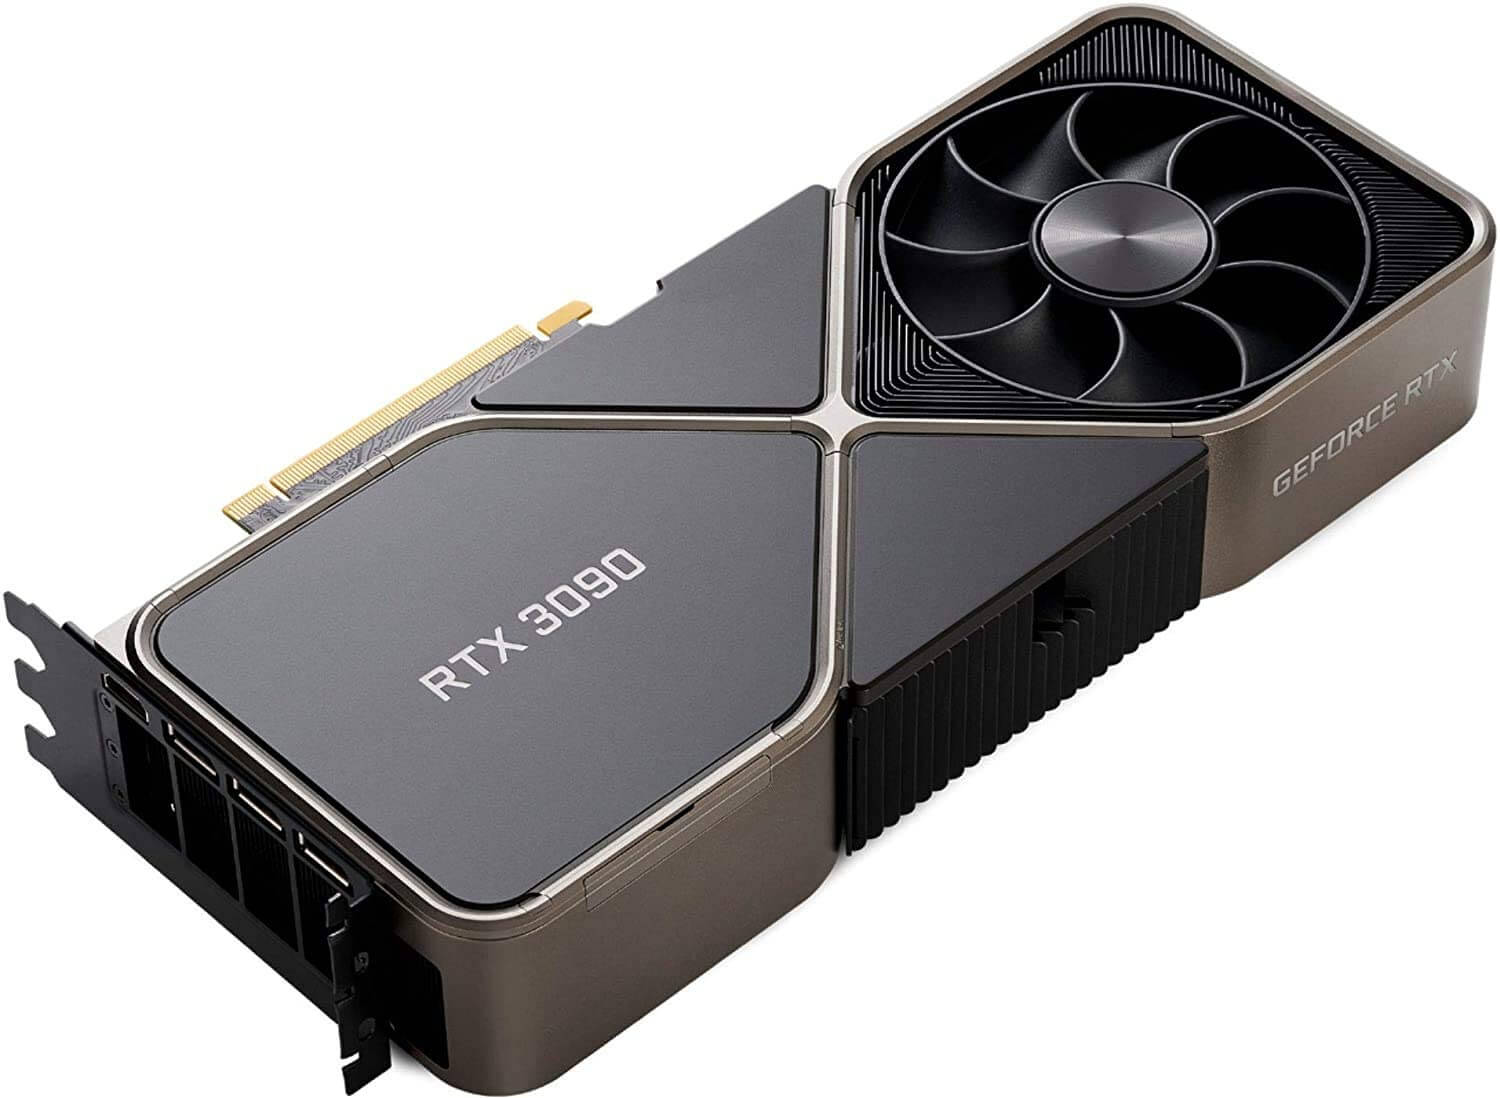 Nvidia RTX 3090 Founders Edition with a triple slot fan heat sink